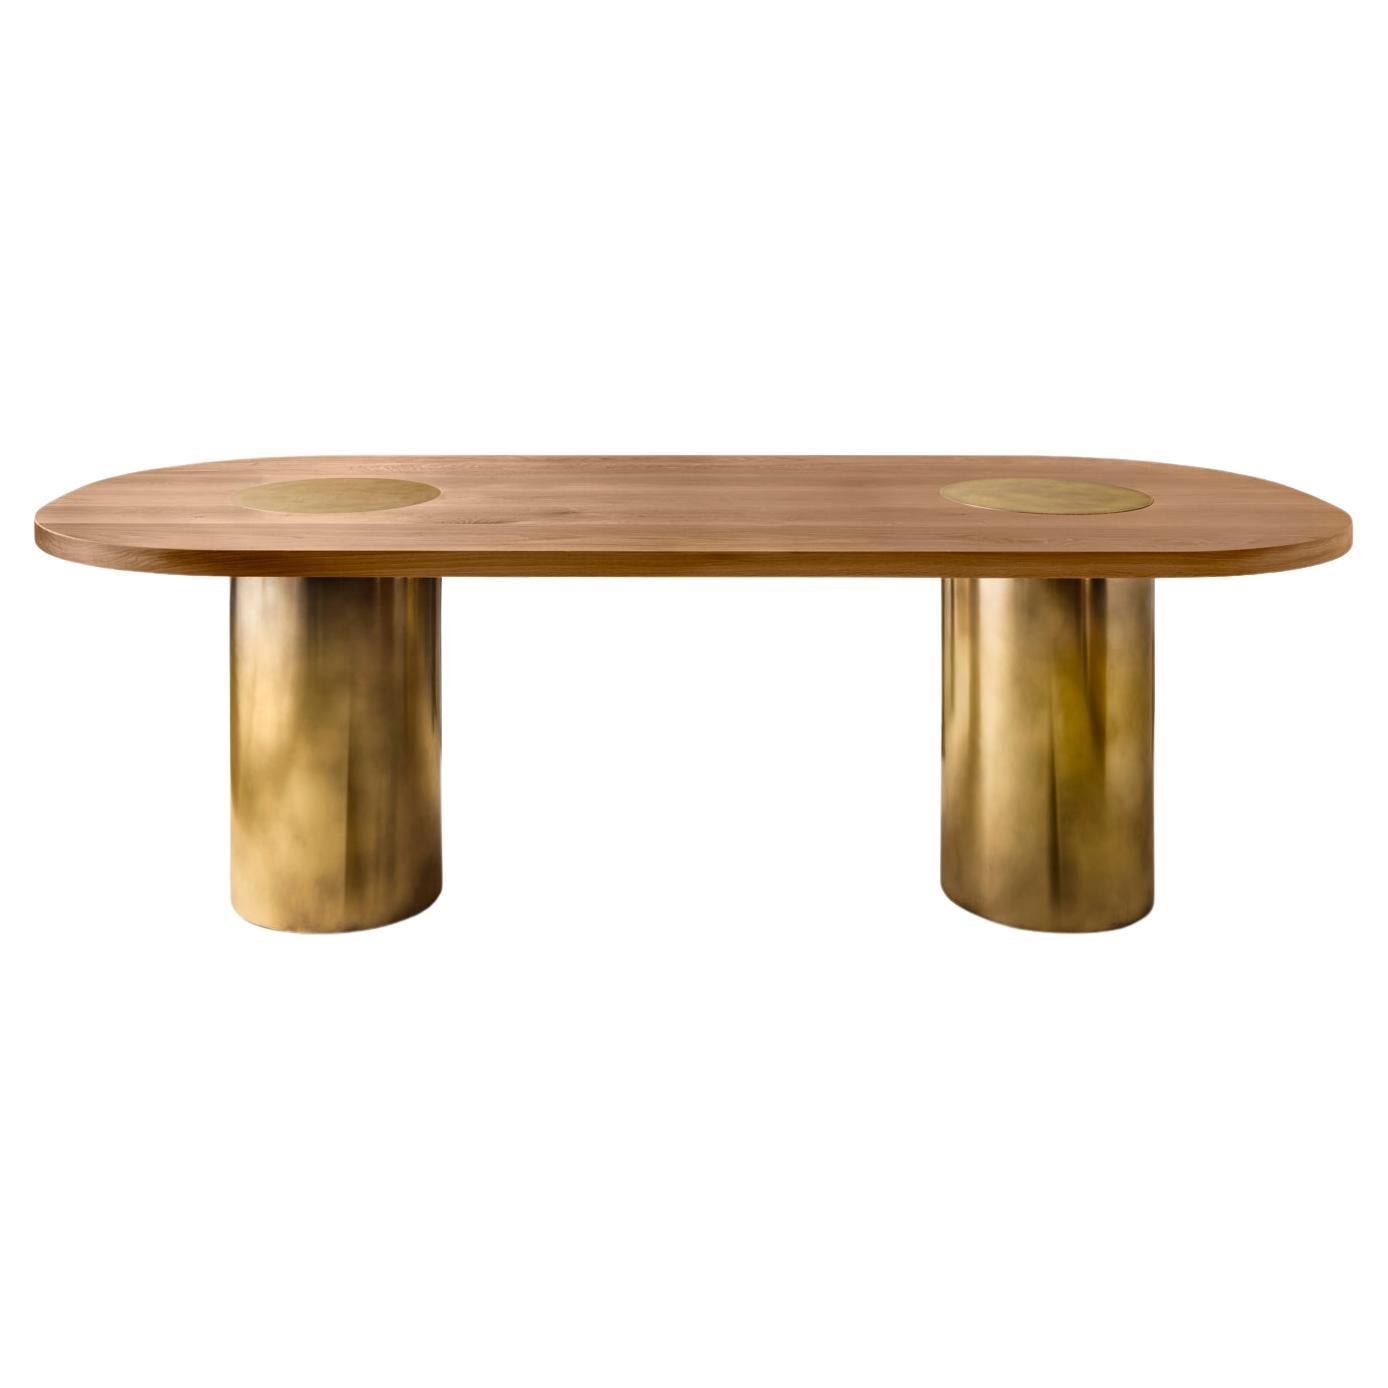 Silo Dining Table - Natural Oak and Burnished Brass For Sale